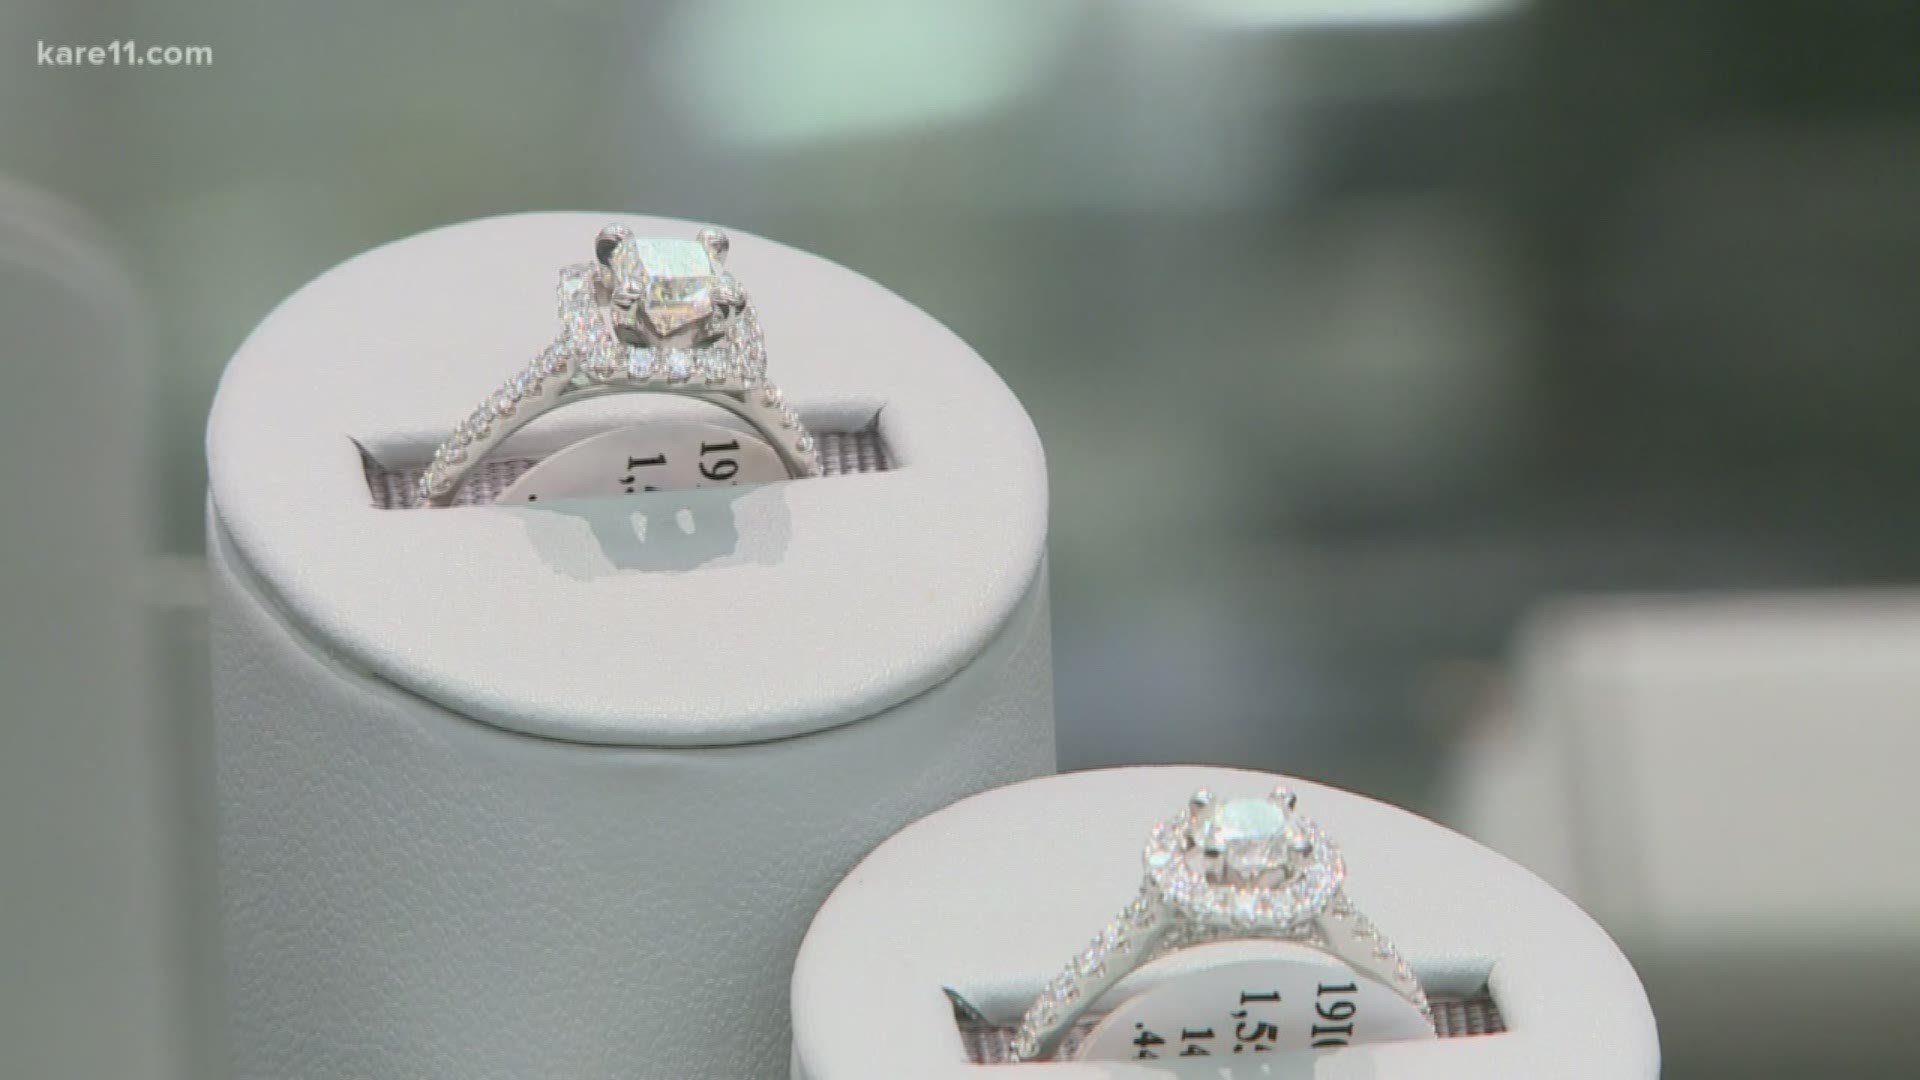 Ready to buy a diamond for that special someone? Now you can decide between mined and lab-grown diamonds.